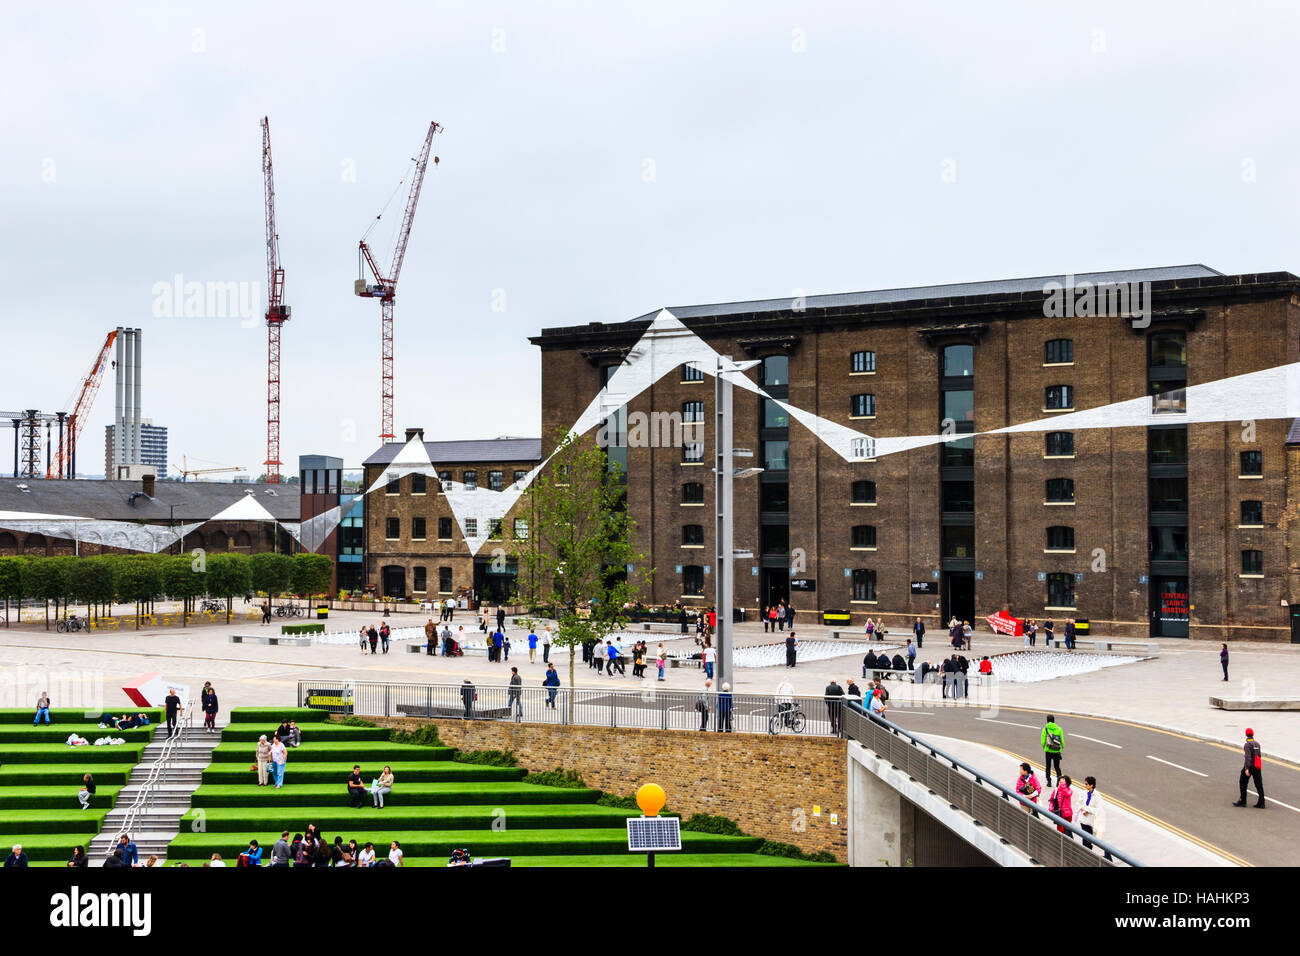 The steps of Granary Square, covered with artificial grass, during the redevelopment of King's Cross, London, UK, 2013 Stock Photo